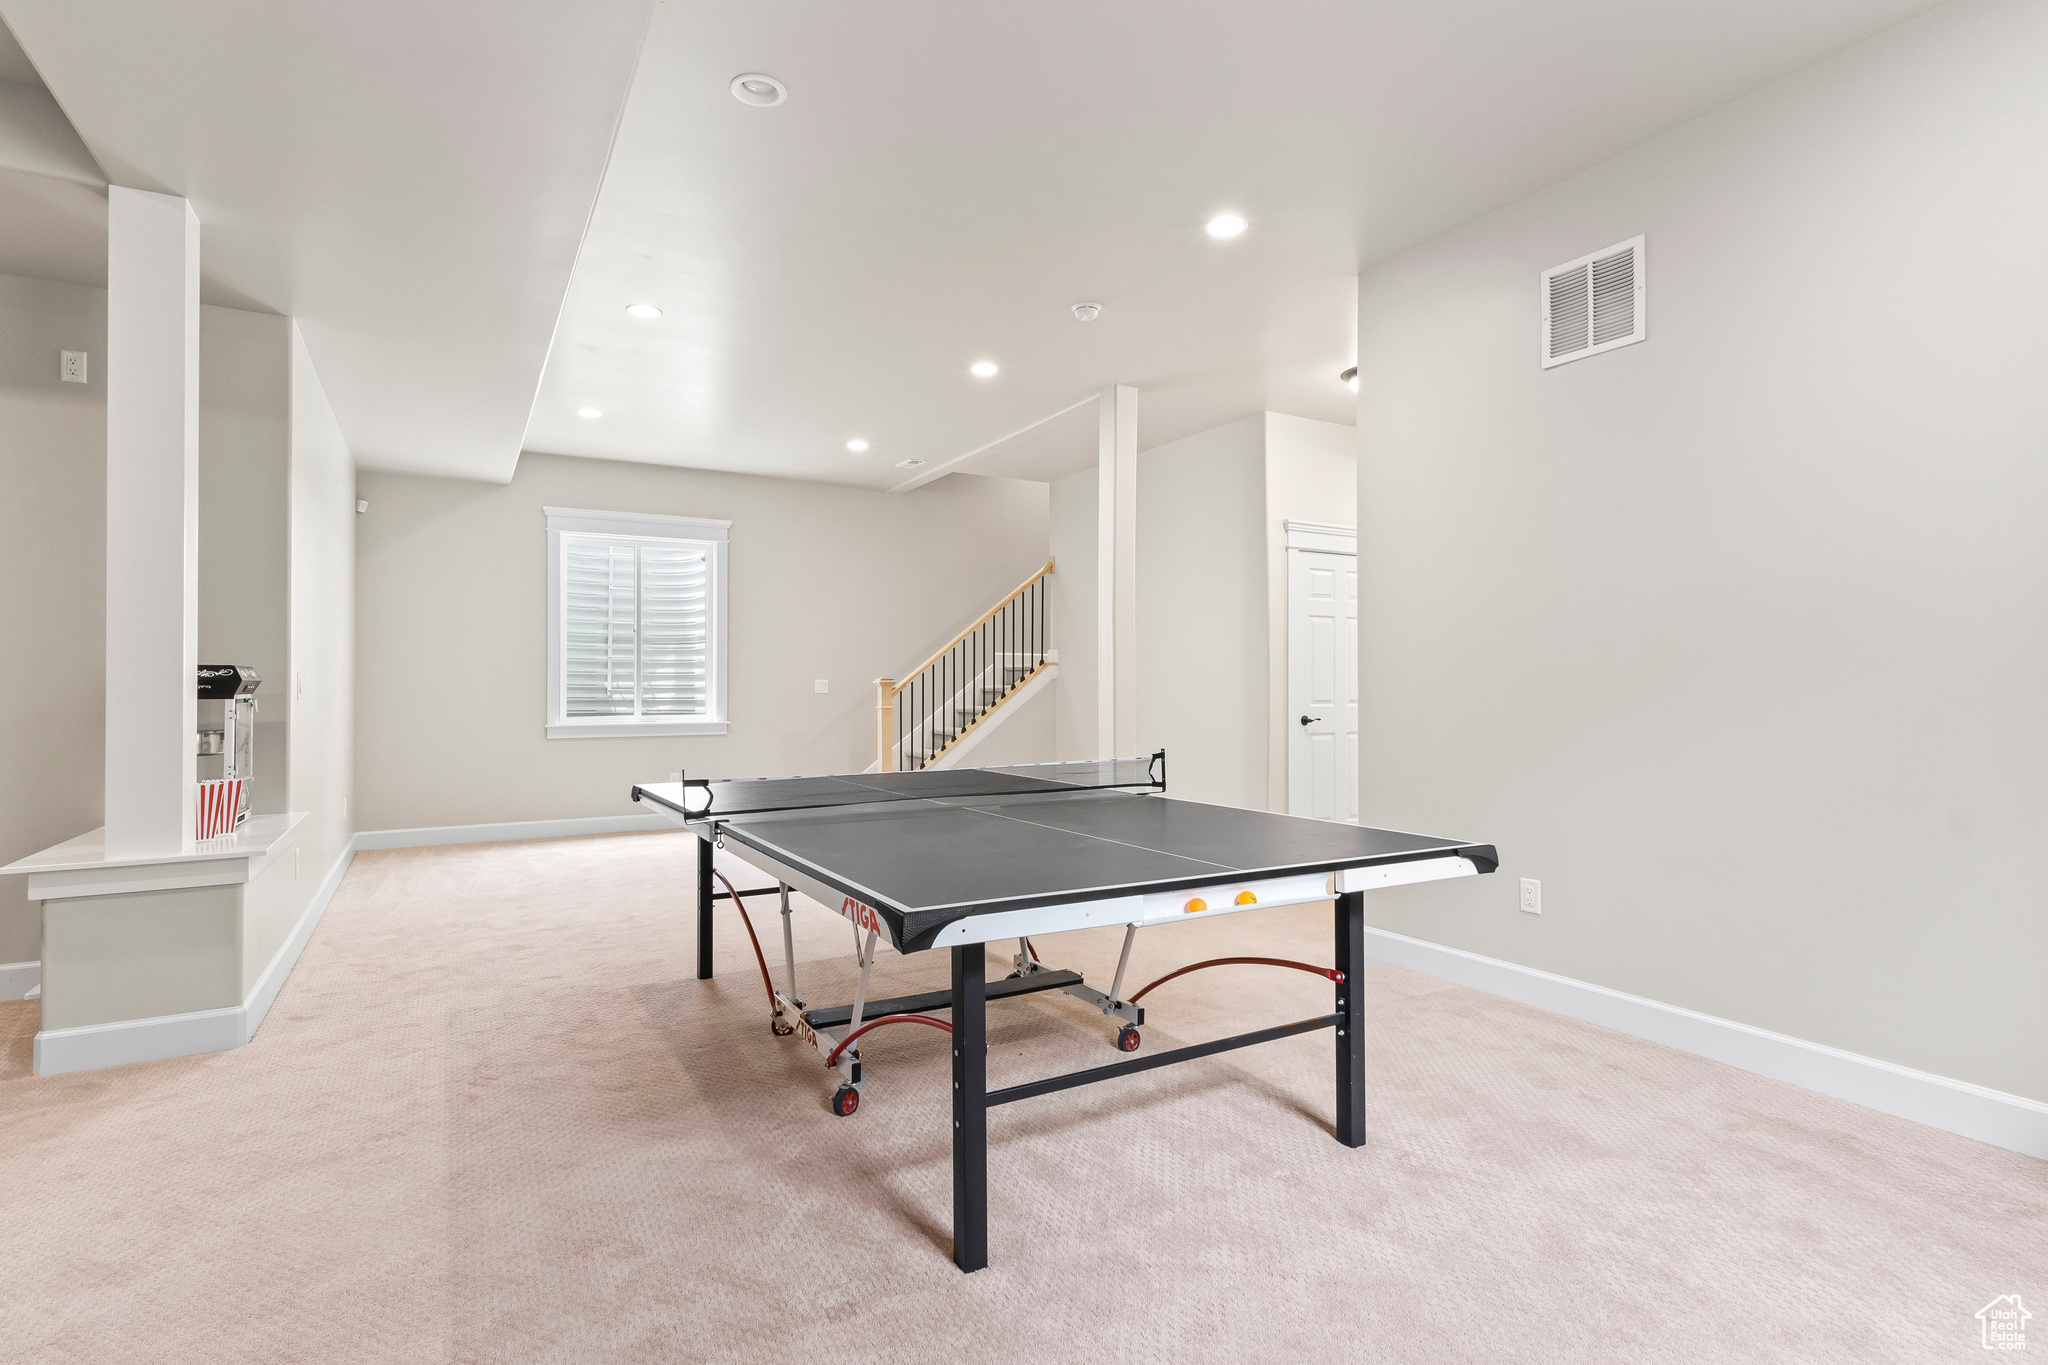 Large basement rec room with 10' ceilings